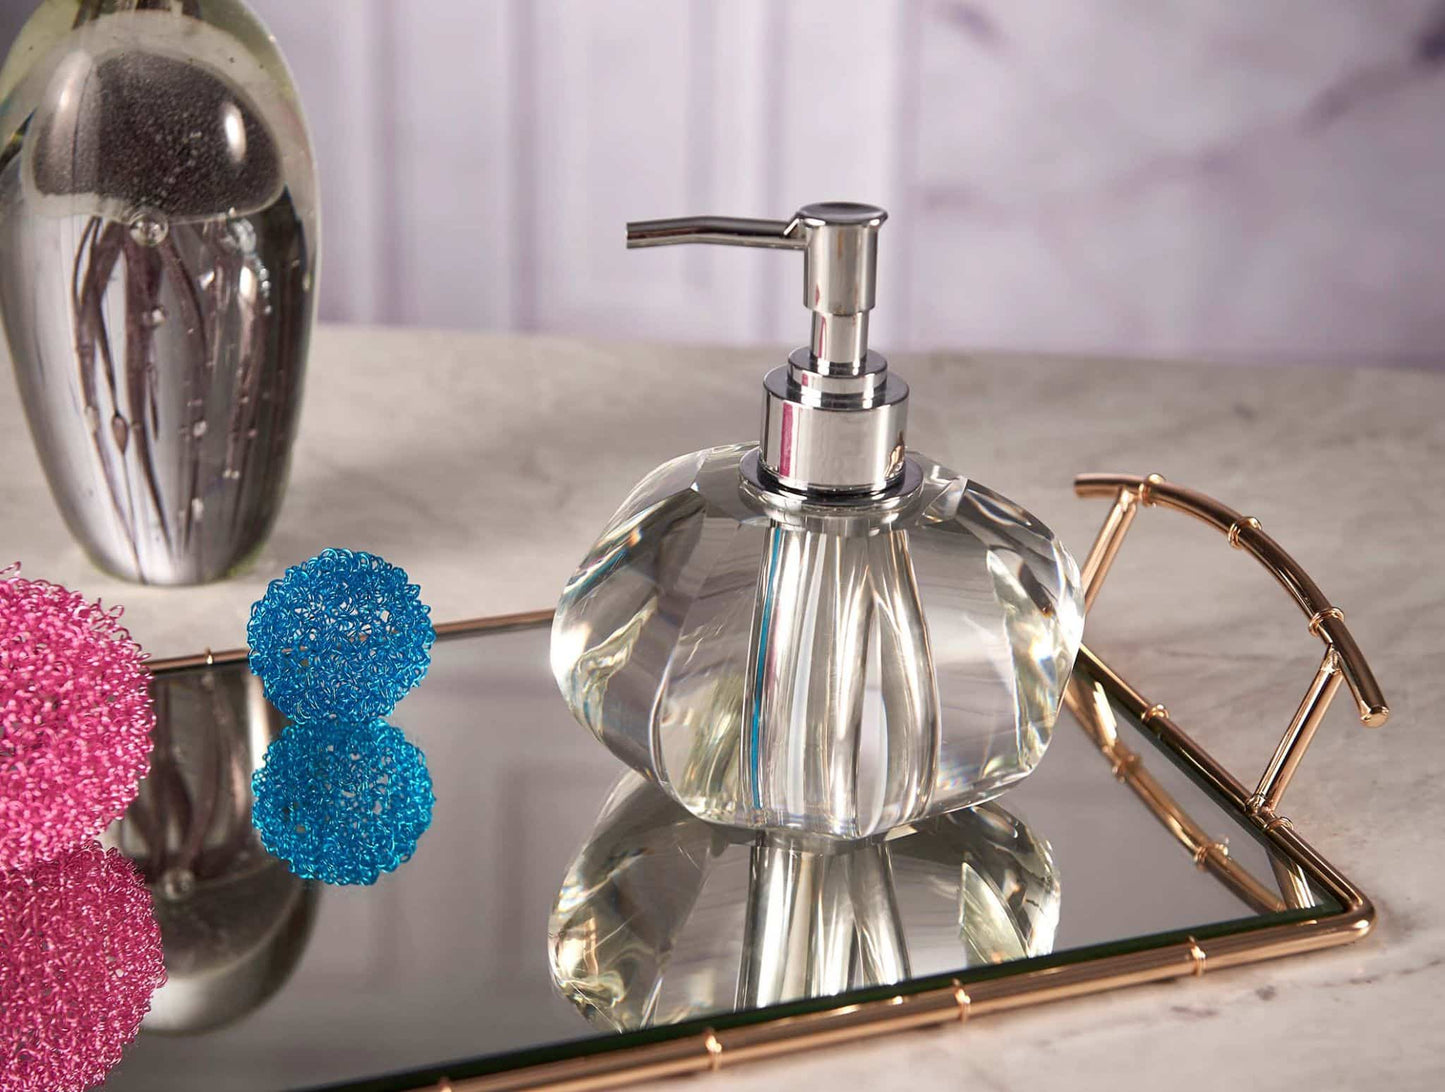 Round Refillable Clear Glass Soap Dispenser